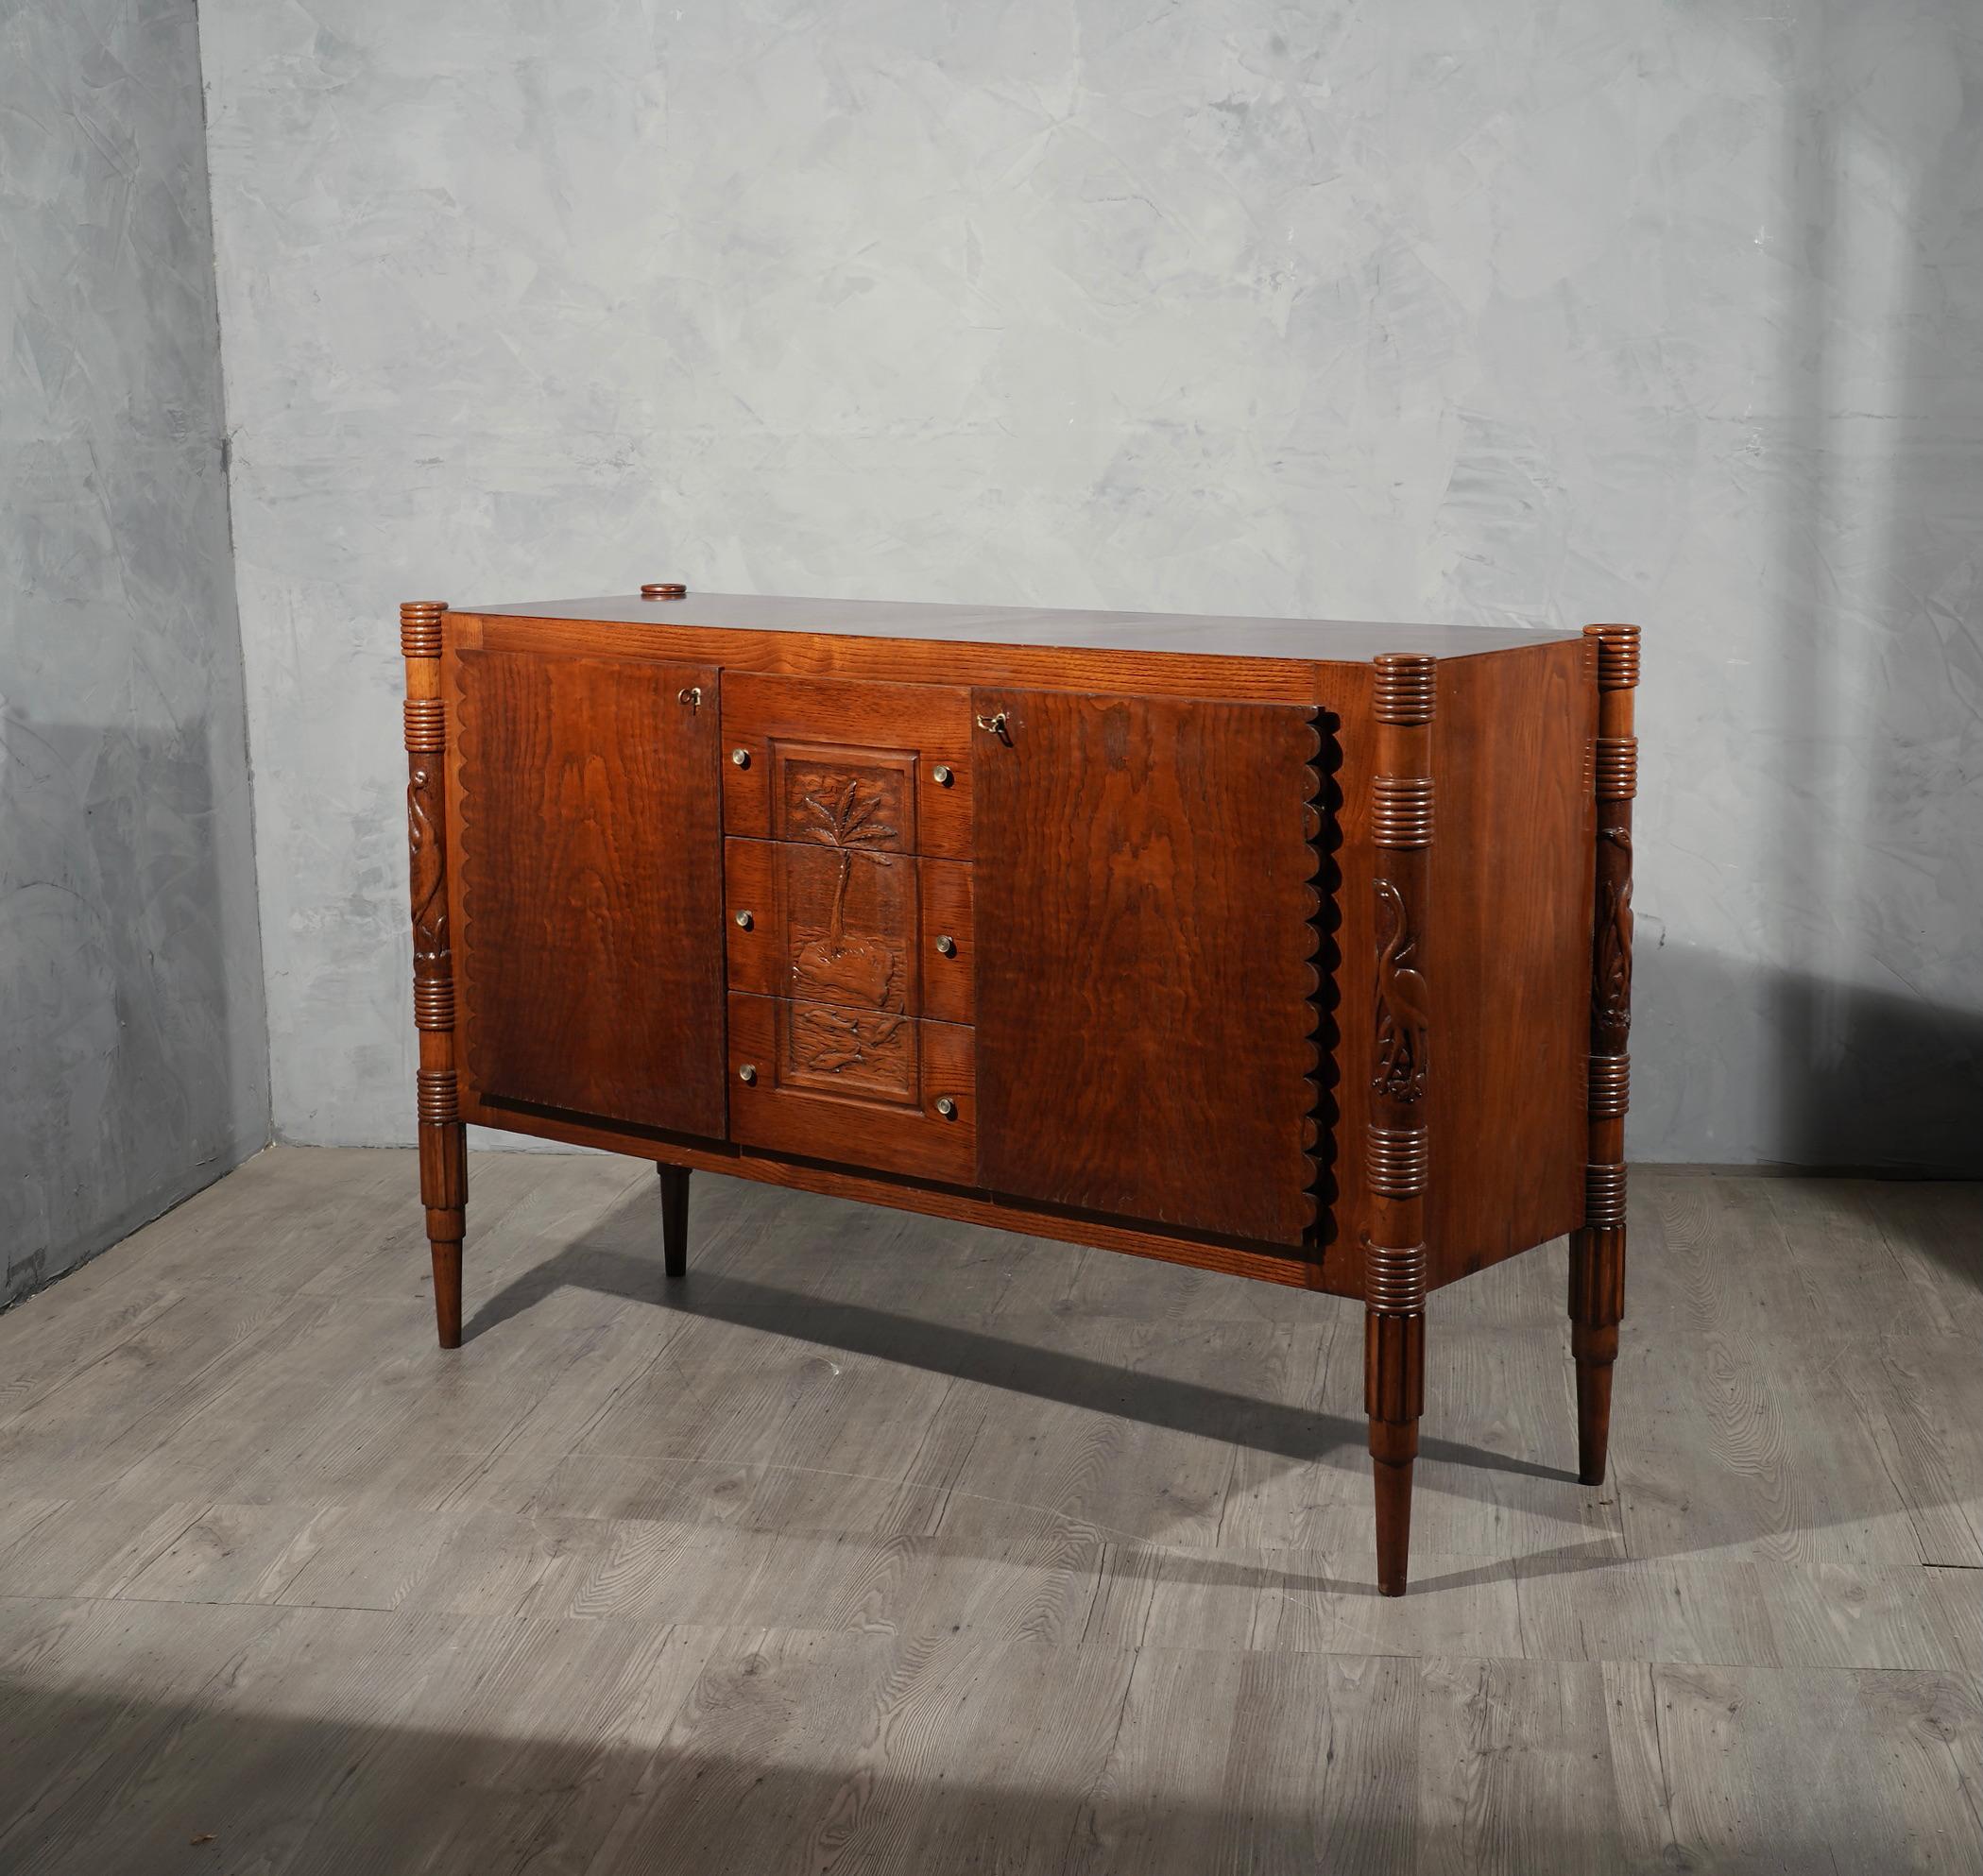 Sideboard Pier Luigi Colli of the middle of the last century. Particular is its processing of the legs, the fronts of the drawers and the edge of the doors.

Sideboards veneered in ash wood, formed by two doors and three central drawers. The legs